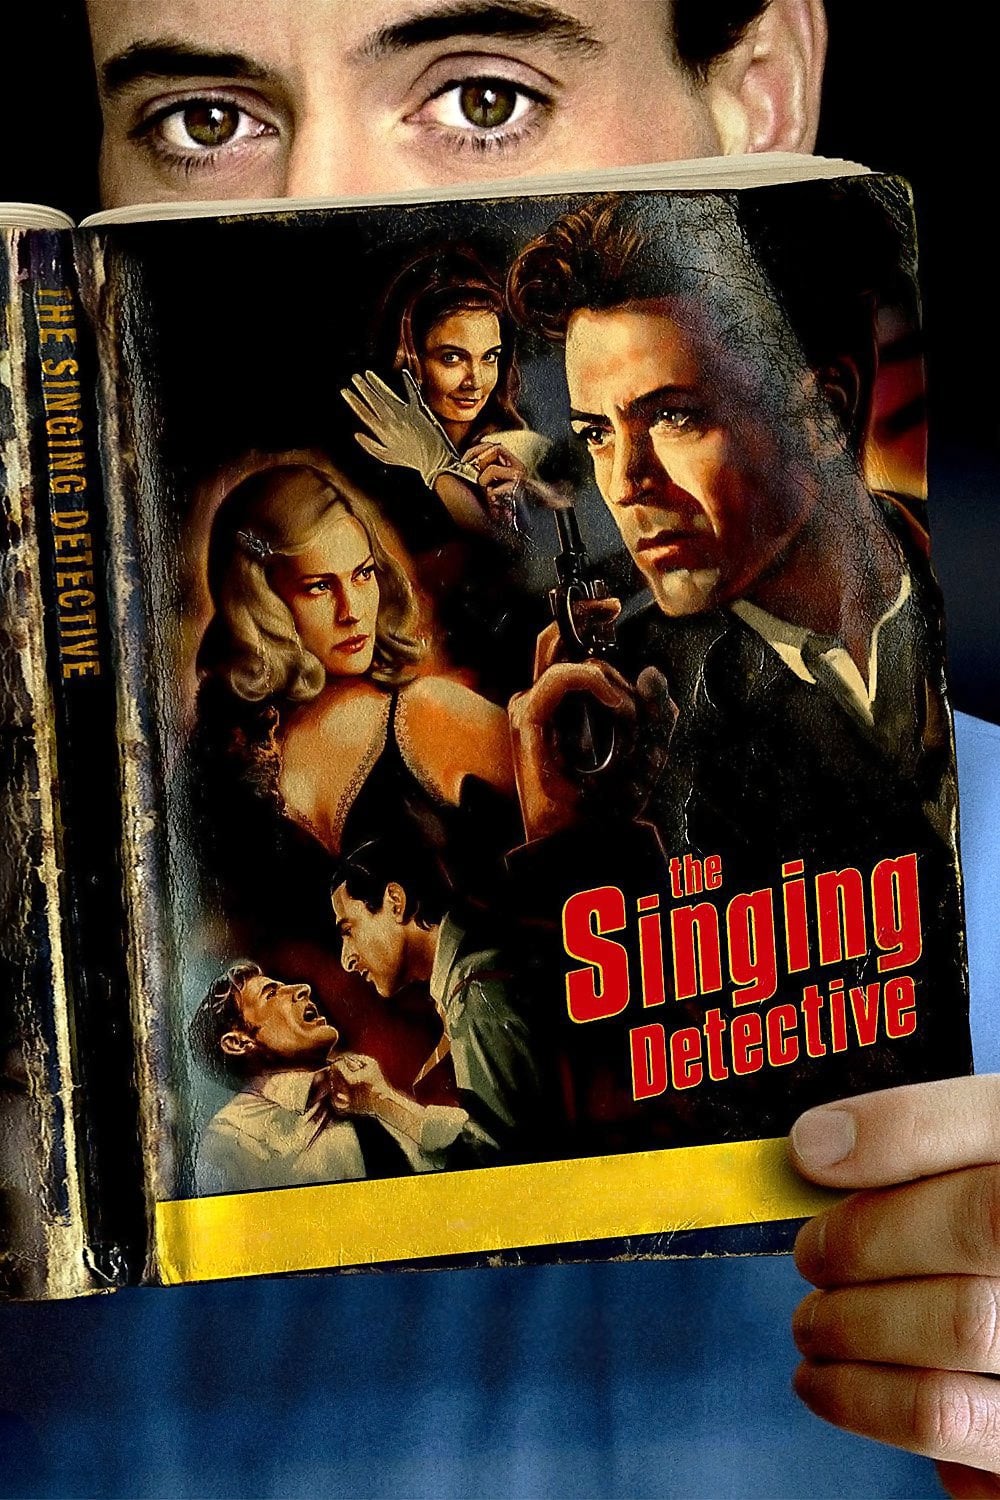 The Singing Detective (2005)